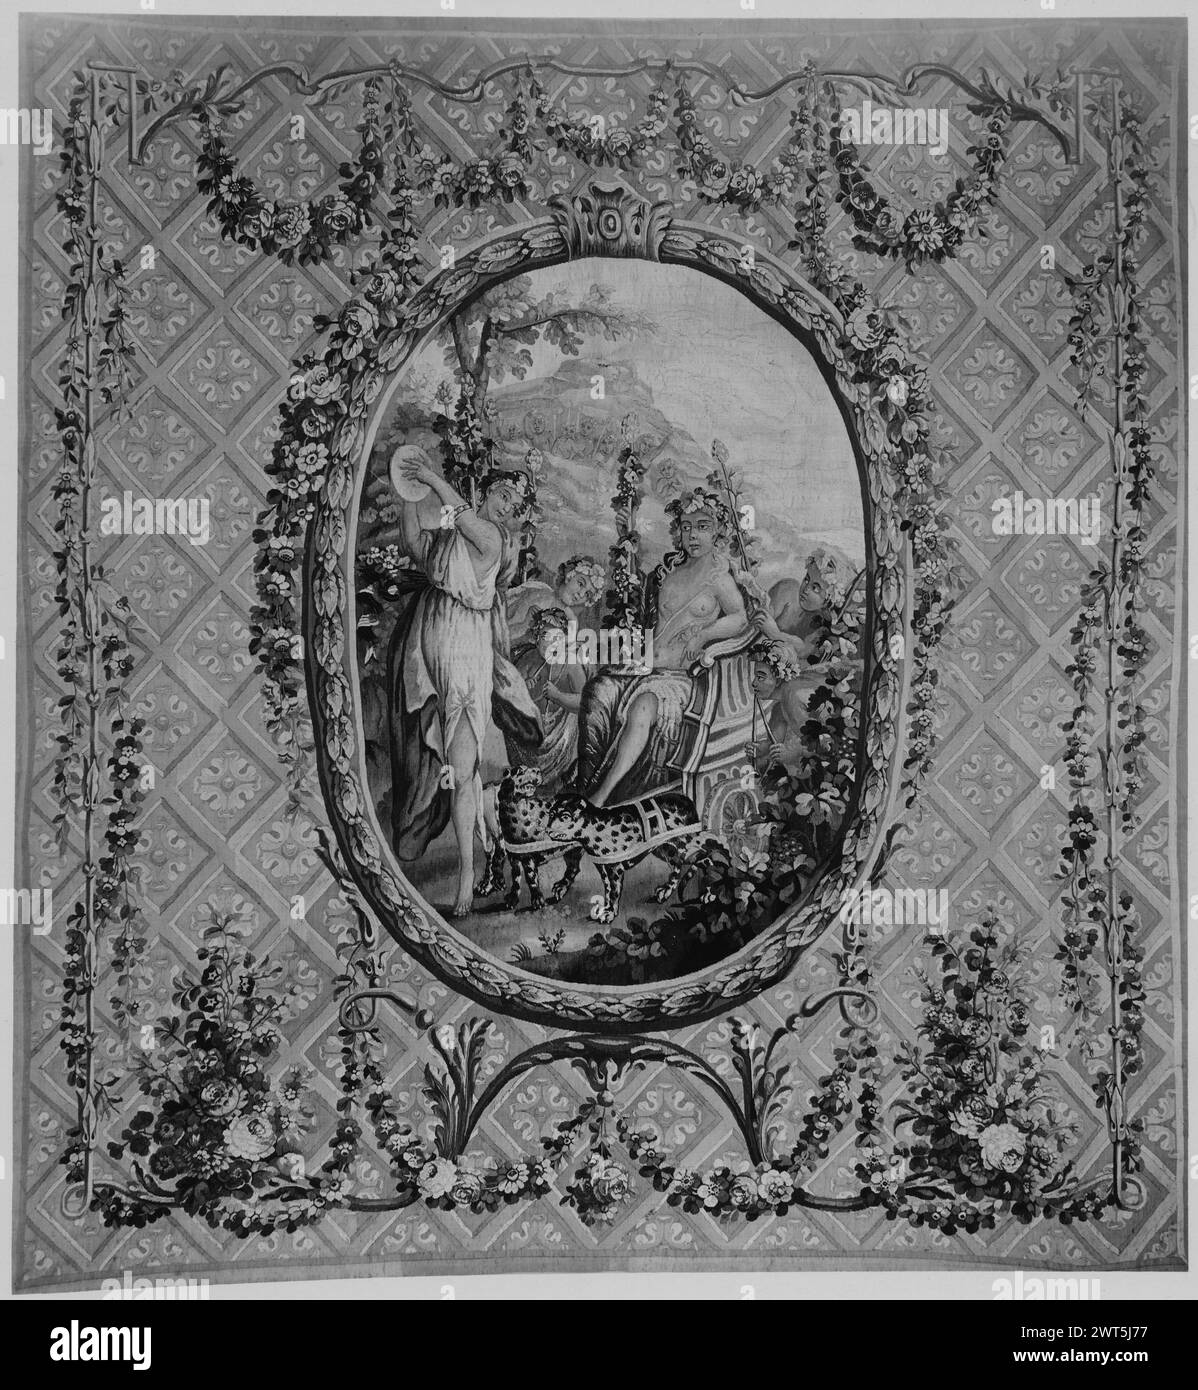 Triumph of Bacchus. Vien, Joseph Marie (the Elder) (French, 1716-1809) (designed after) [painter] c. 1770-1790 Tapestry Dimensions: H 7'4' x W 7' Tapestry Materials/Techniques: unknown Culture: French Weaving Center: Aubusson Ownership History: Jacques Seligmann & Co. sold to Mrs. Hubbard 9/4/1928. In medallion with laurel wreath frame (ALENTOUR) trellis ground with rosettes in lozenges, decorated with arabesque frame of garlands & festoons, bouquets of flowers & acanthus leaves The name 'E. Le Roux' appears on verso of GCPA 0240409. Jacques Seligmann & Co. stock sheet in archive, 11800 Relate Stock Photo